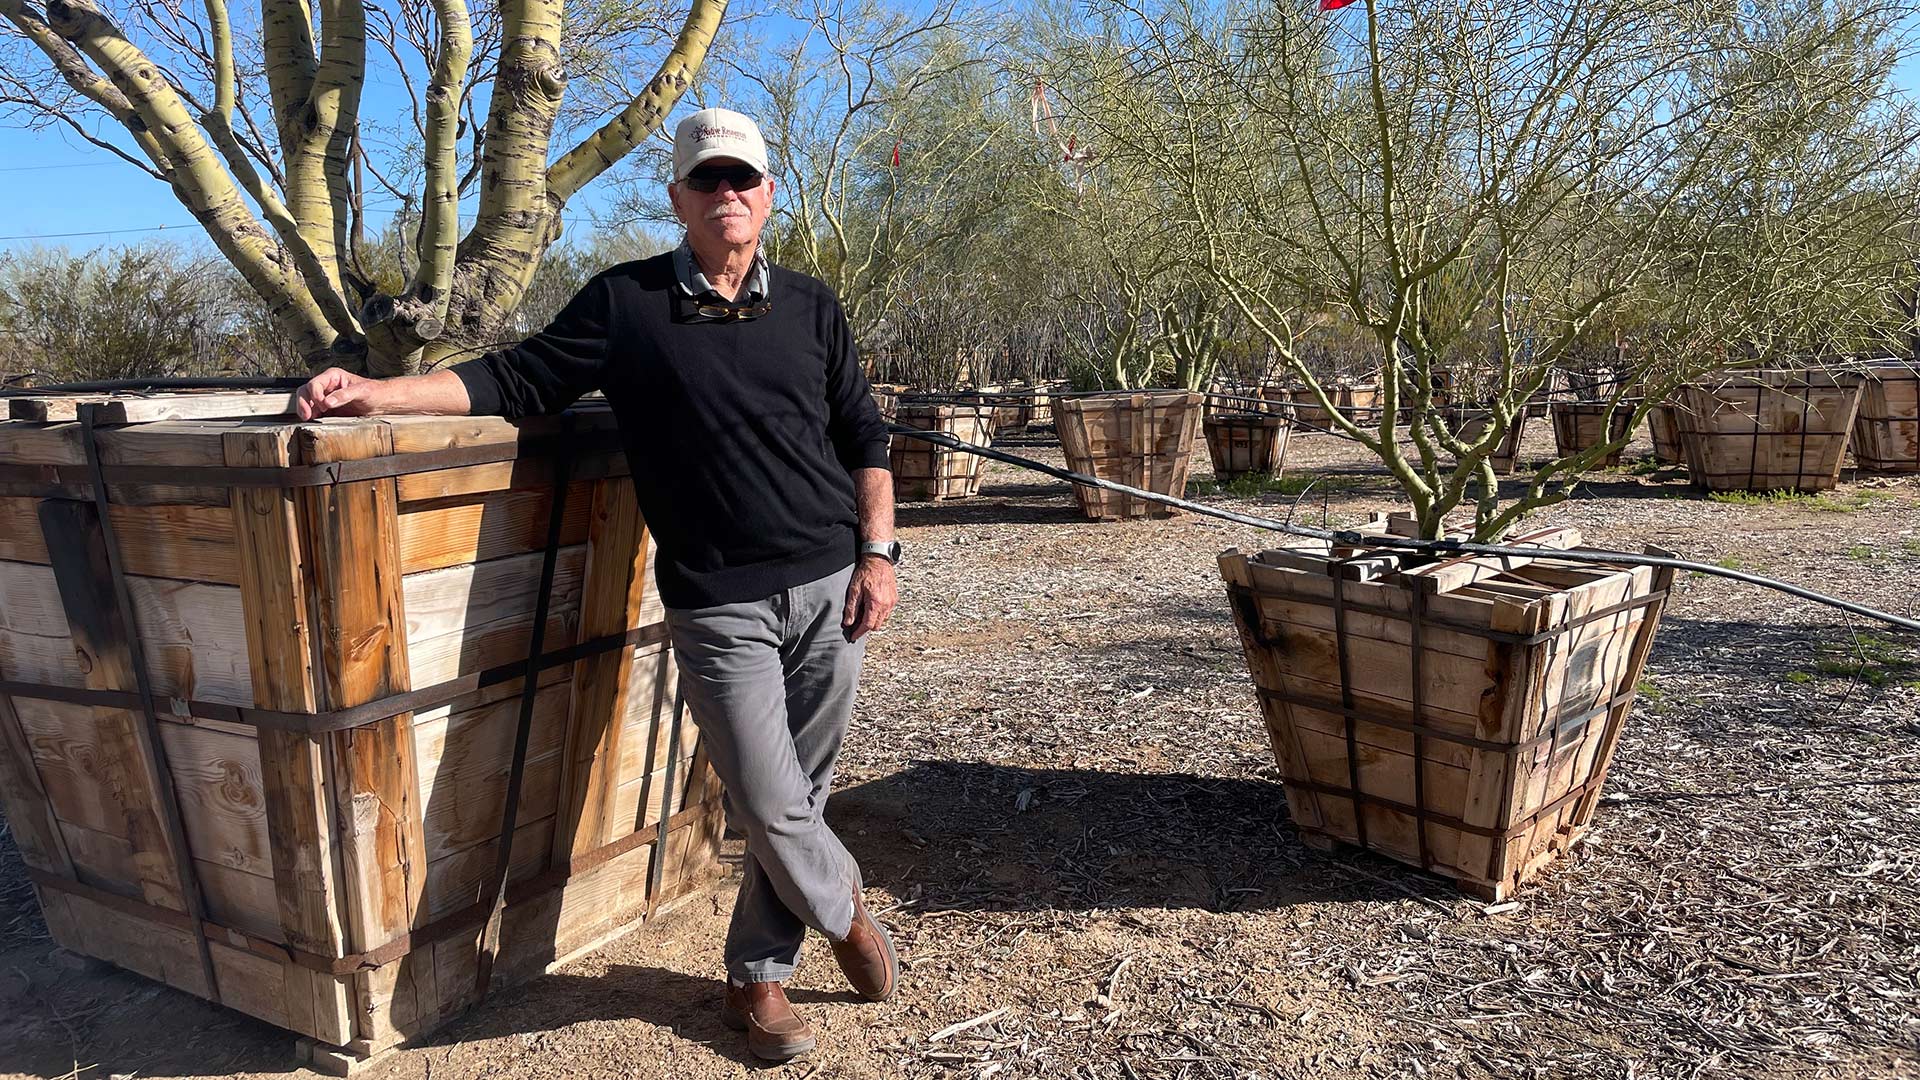 “What we have been able to do with developers is make them understand that not only is there an environmental advantage to saving the trees ... there's also a monetary advantage,” says Rob Kater, owner of Native Resources